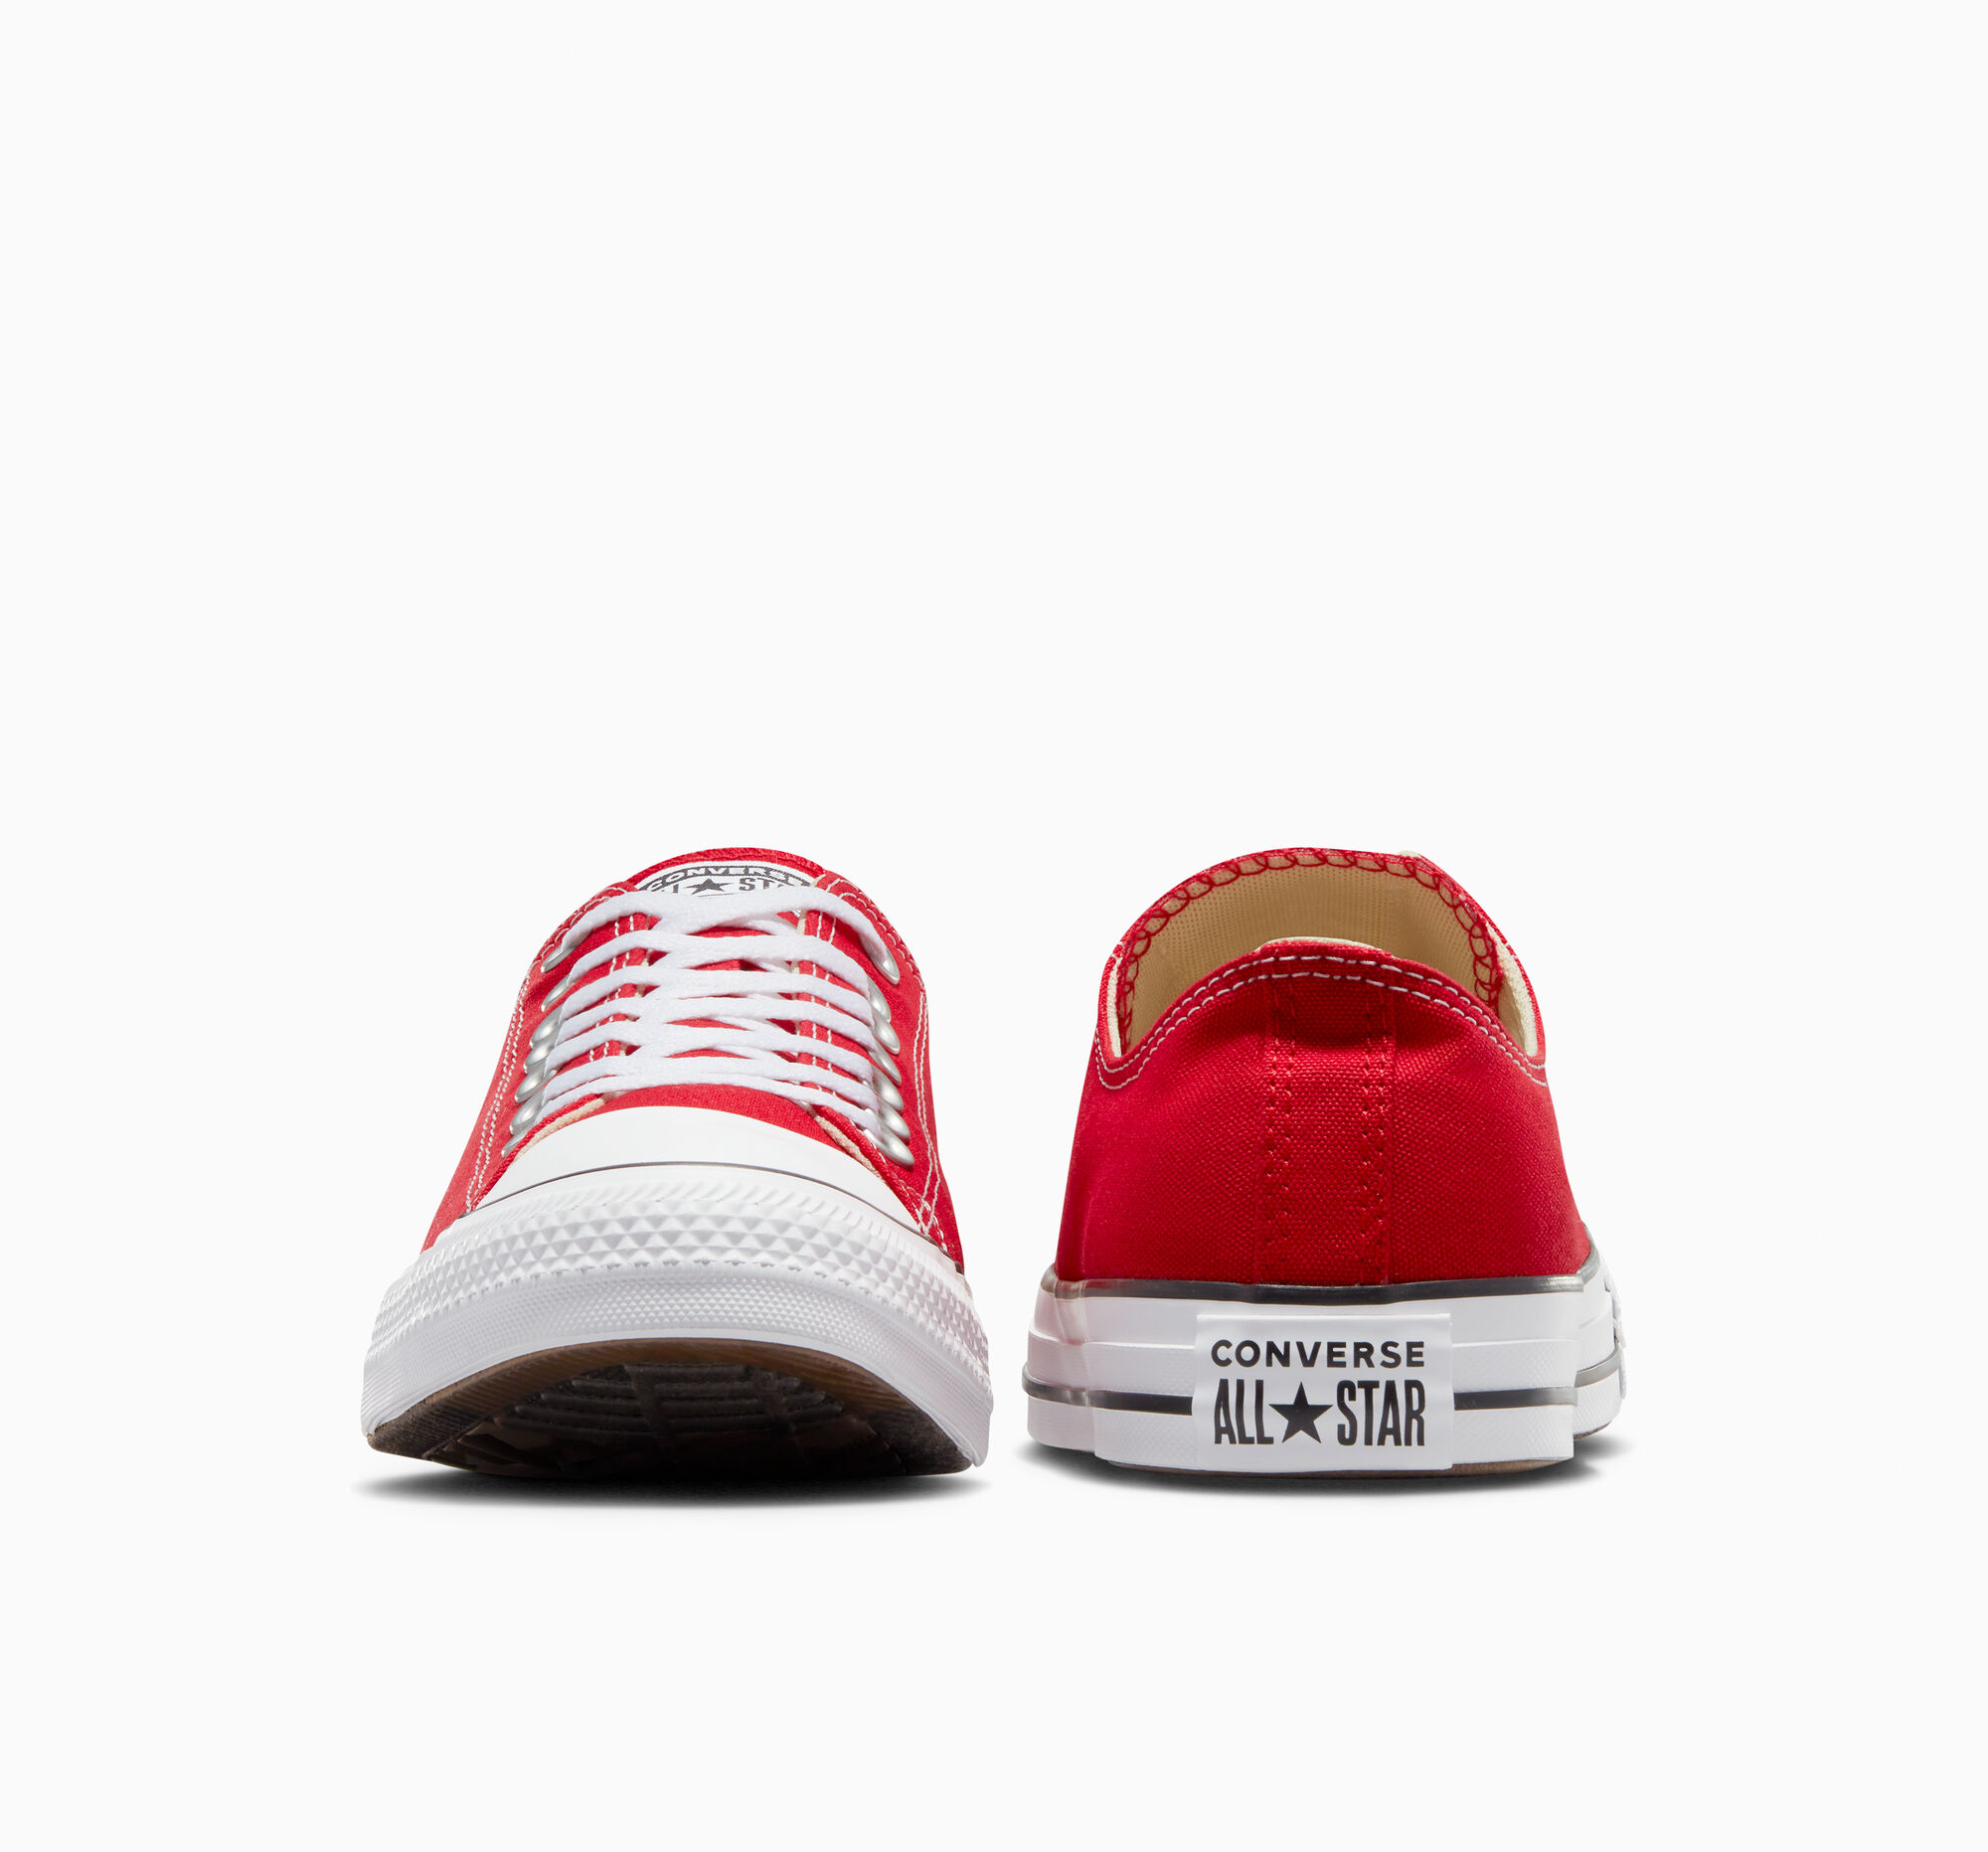 converse-chuck-taylor-all-star-ox-shoes-m9696